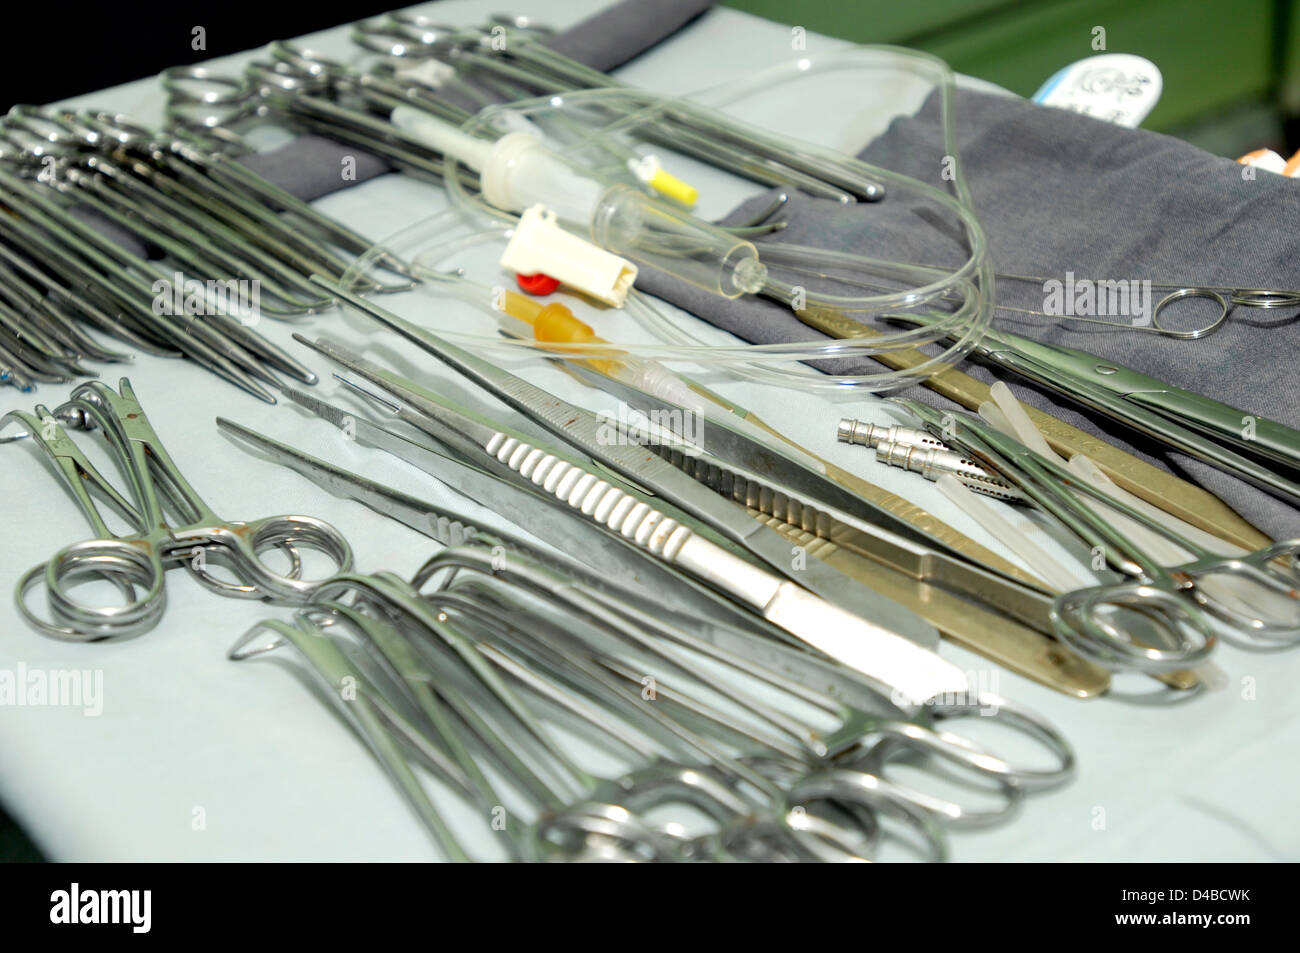 Surgical instruments prepared for surgery with infusion set. Sudan, Africa. Stock Photo